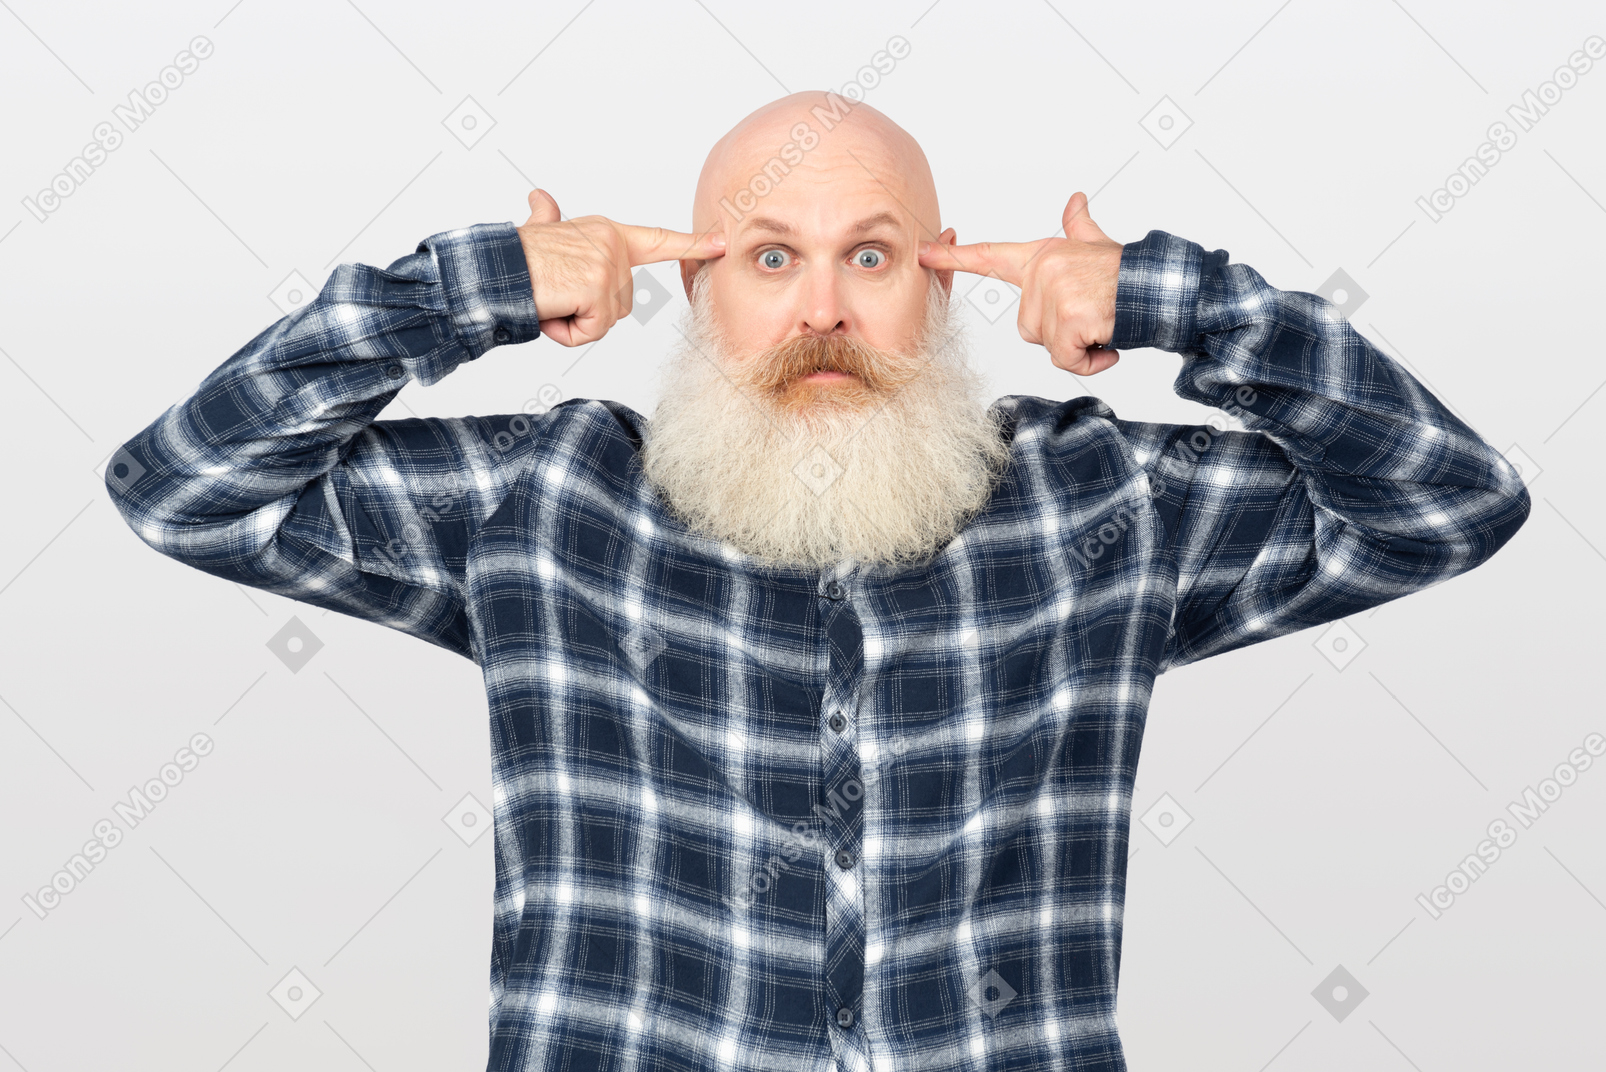 Bearded man holding pointing fingers at his temples